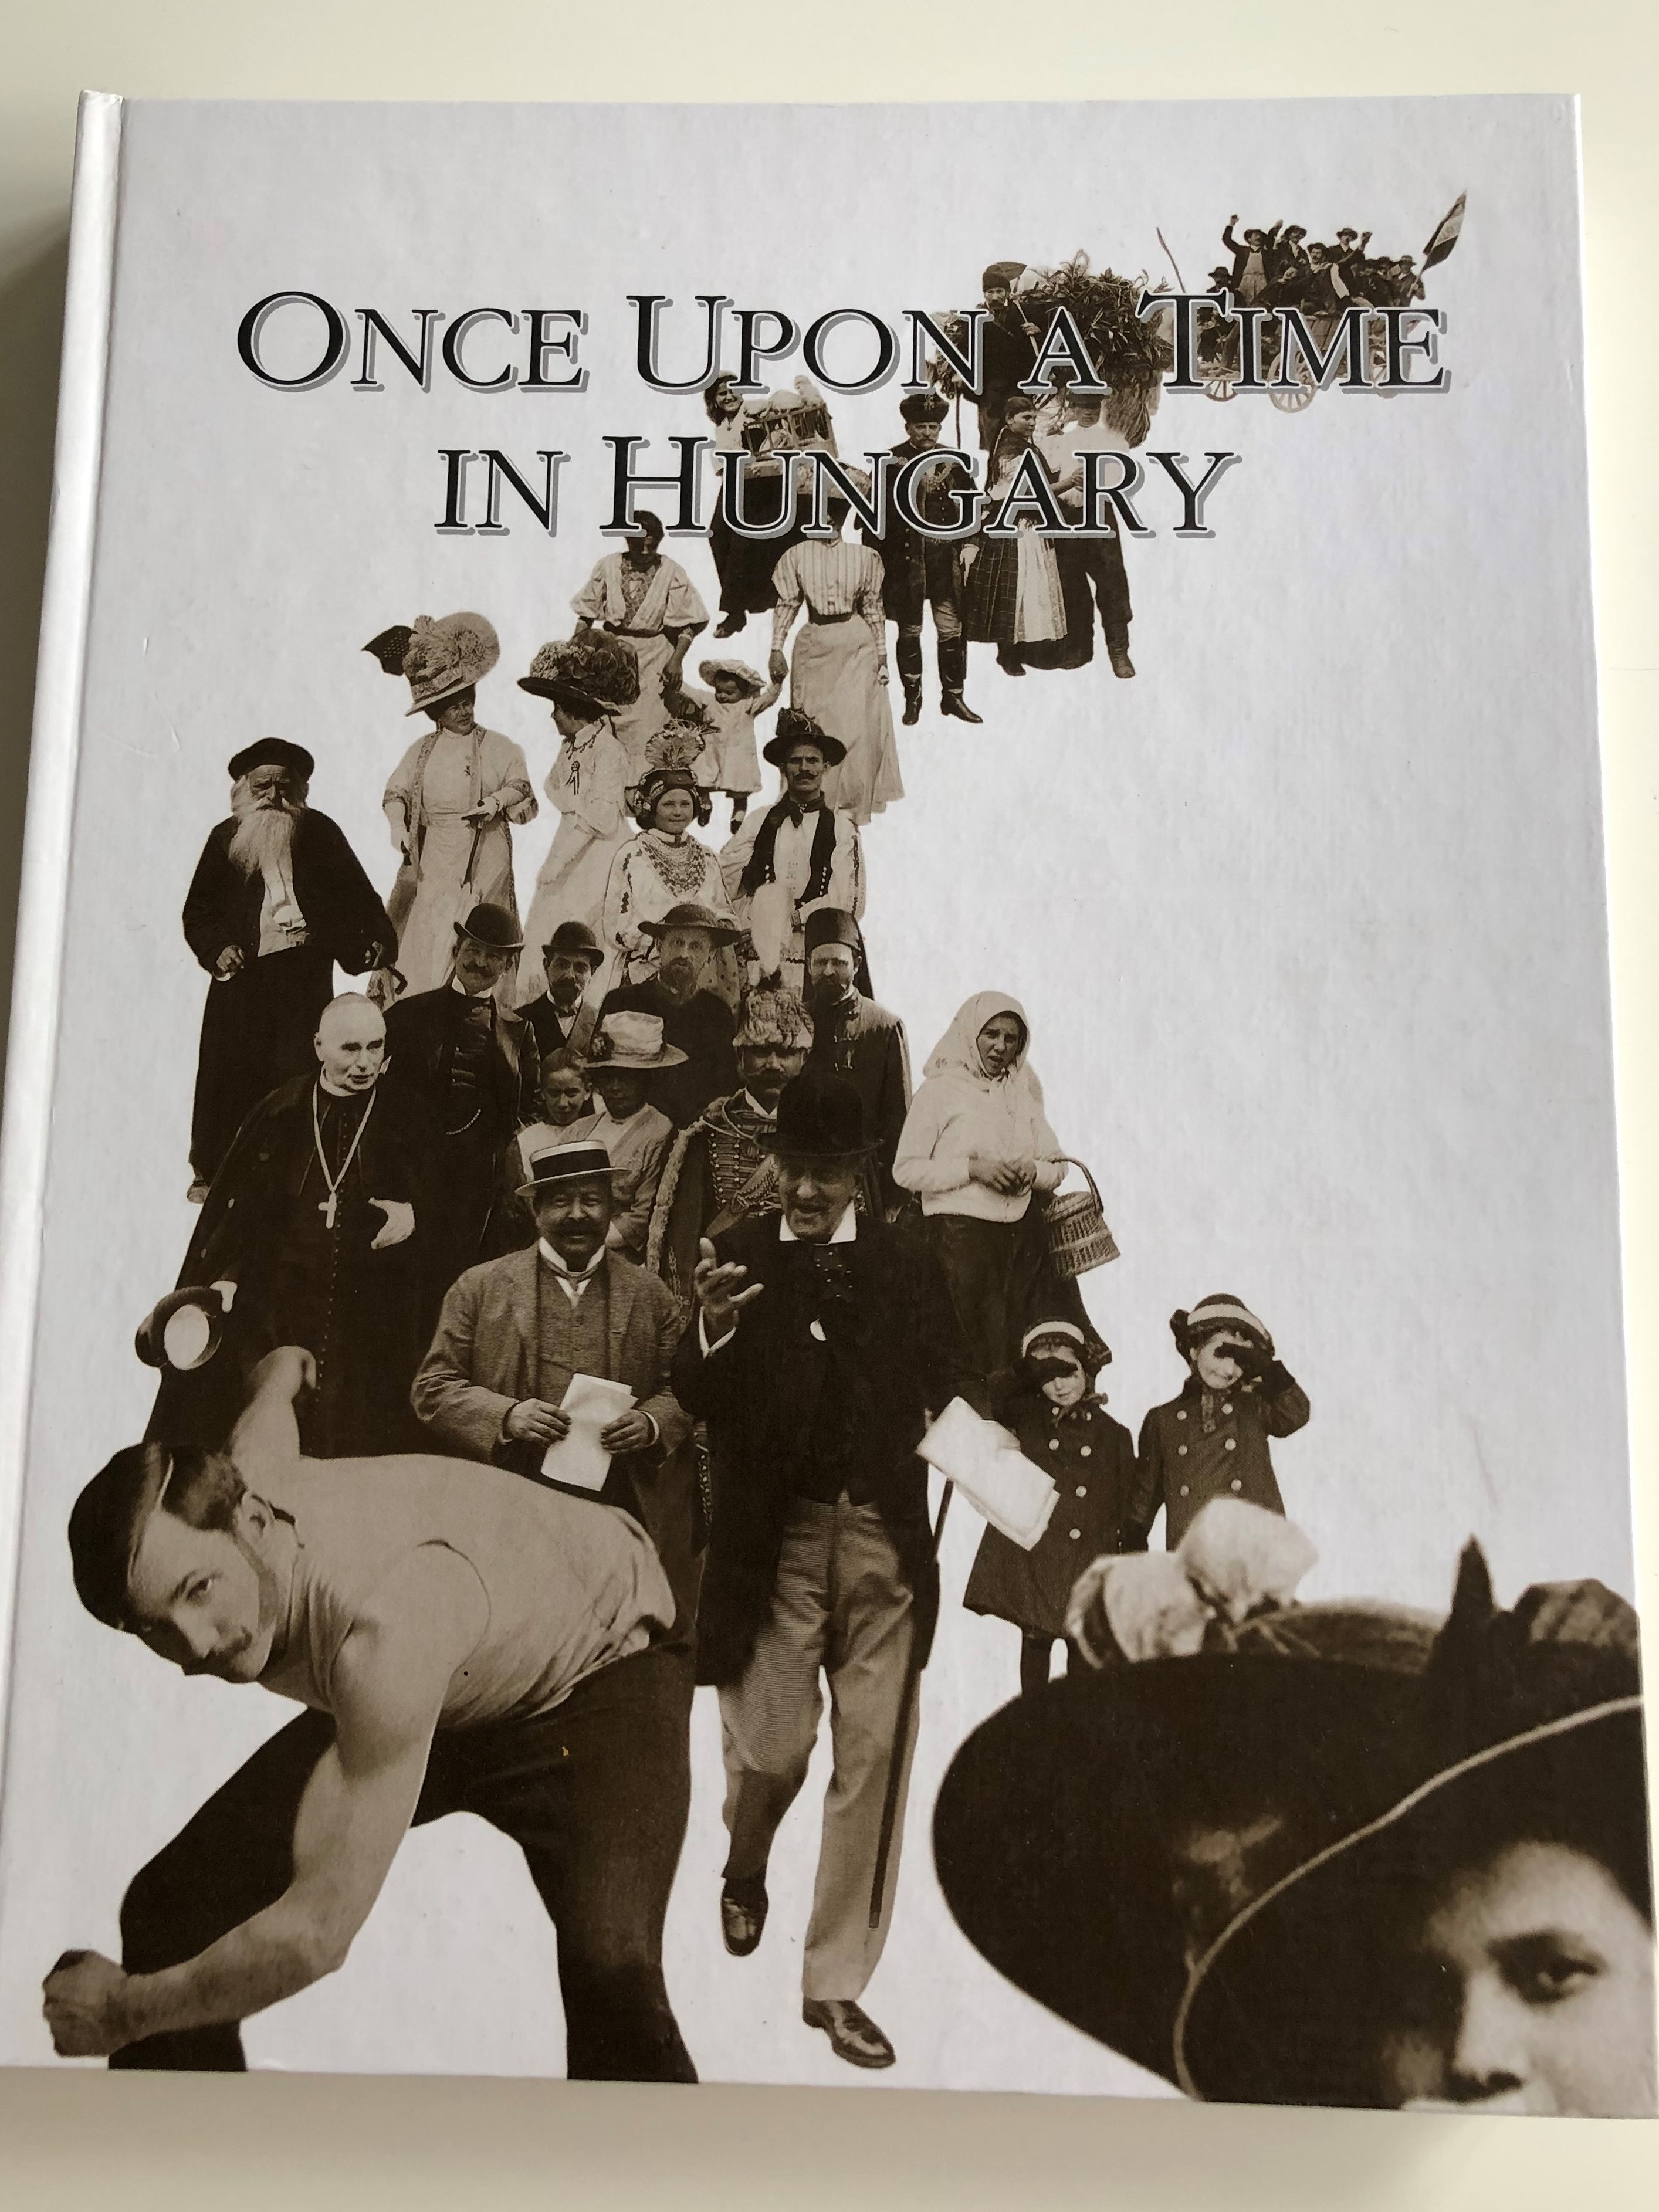 once-upon-a-time-in-hungary-by-andr-s-ger-katalin-jalsovszky-em-ke-tomsics-the-world-of-the-late-19th-and-early-20th-century-hungarian-national-museum-hardcover-1996-1-.jpg